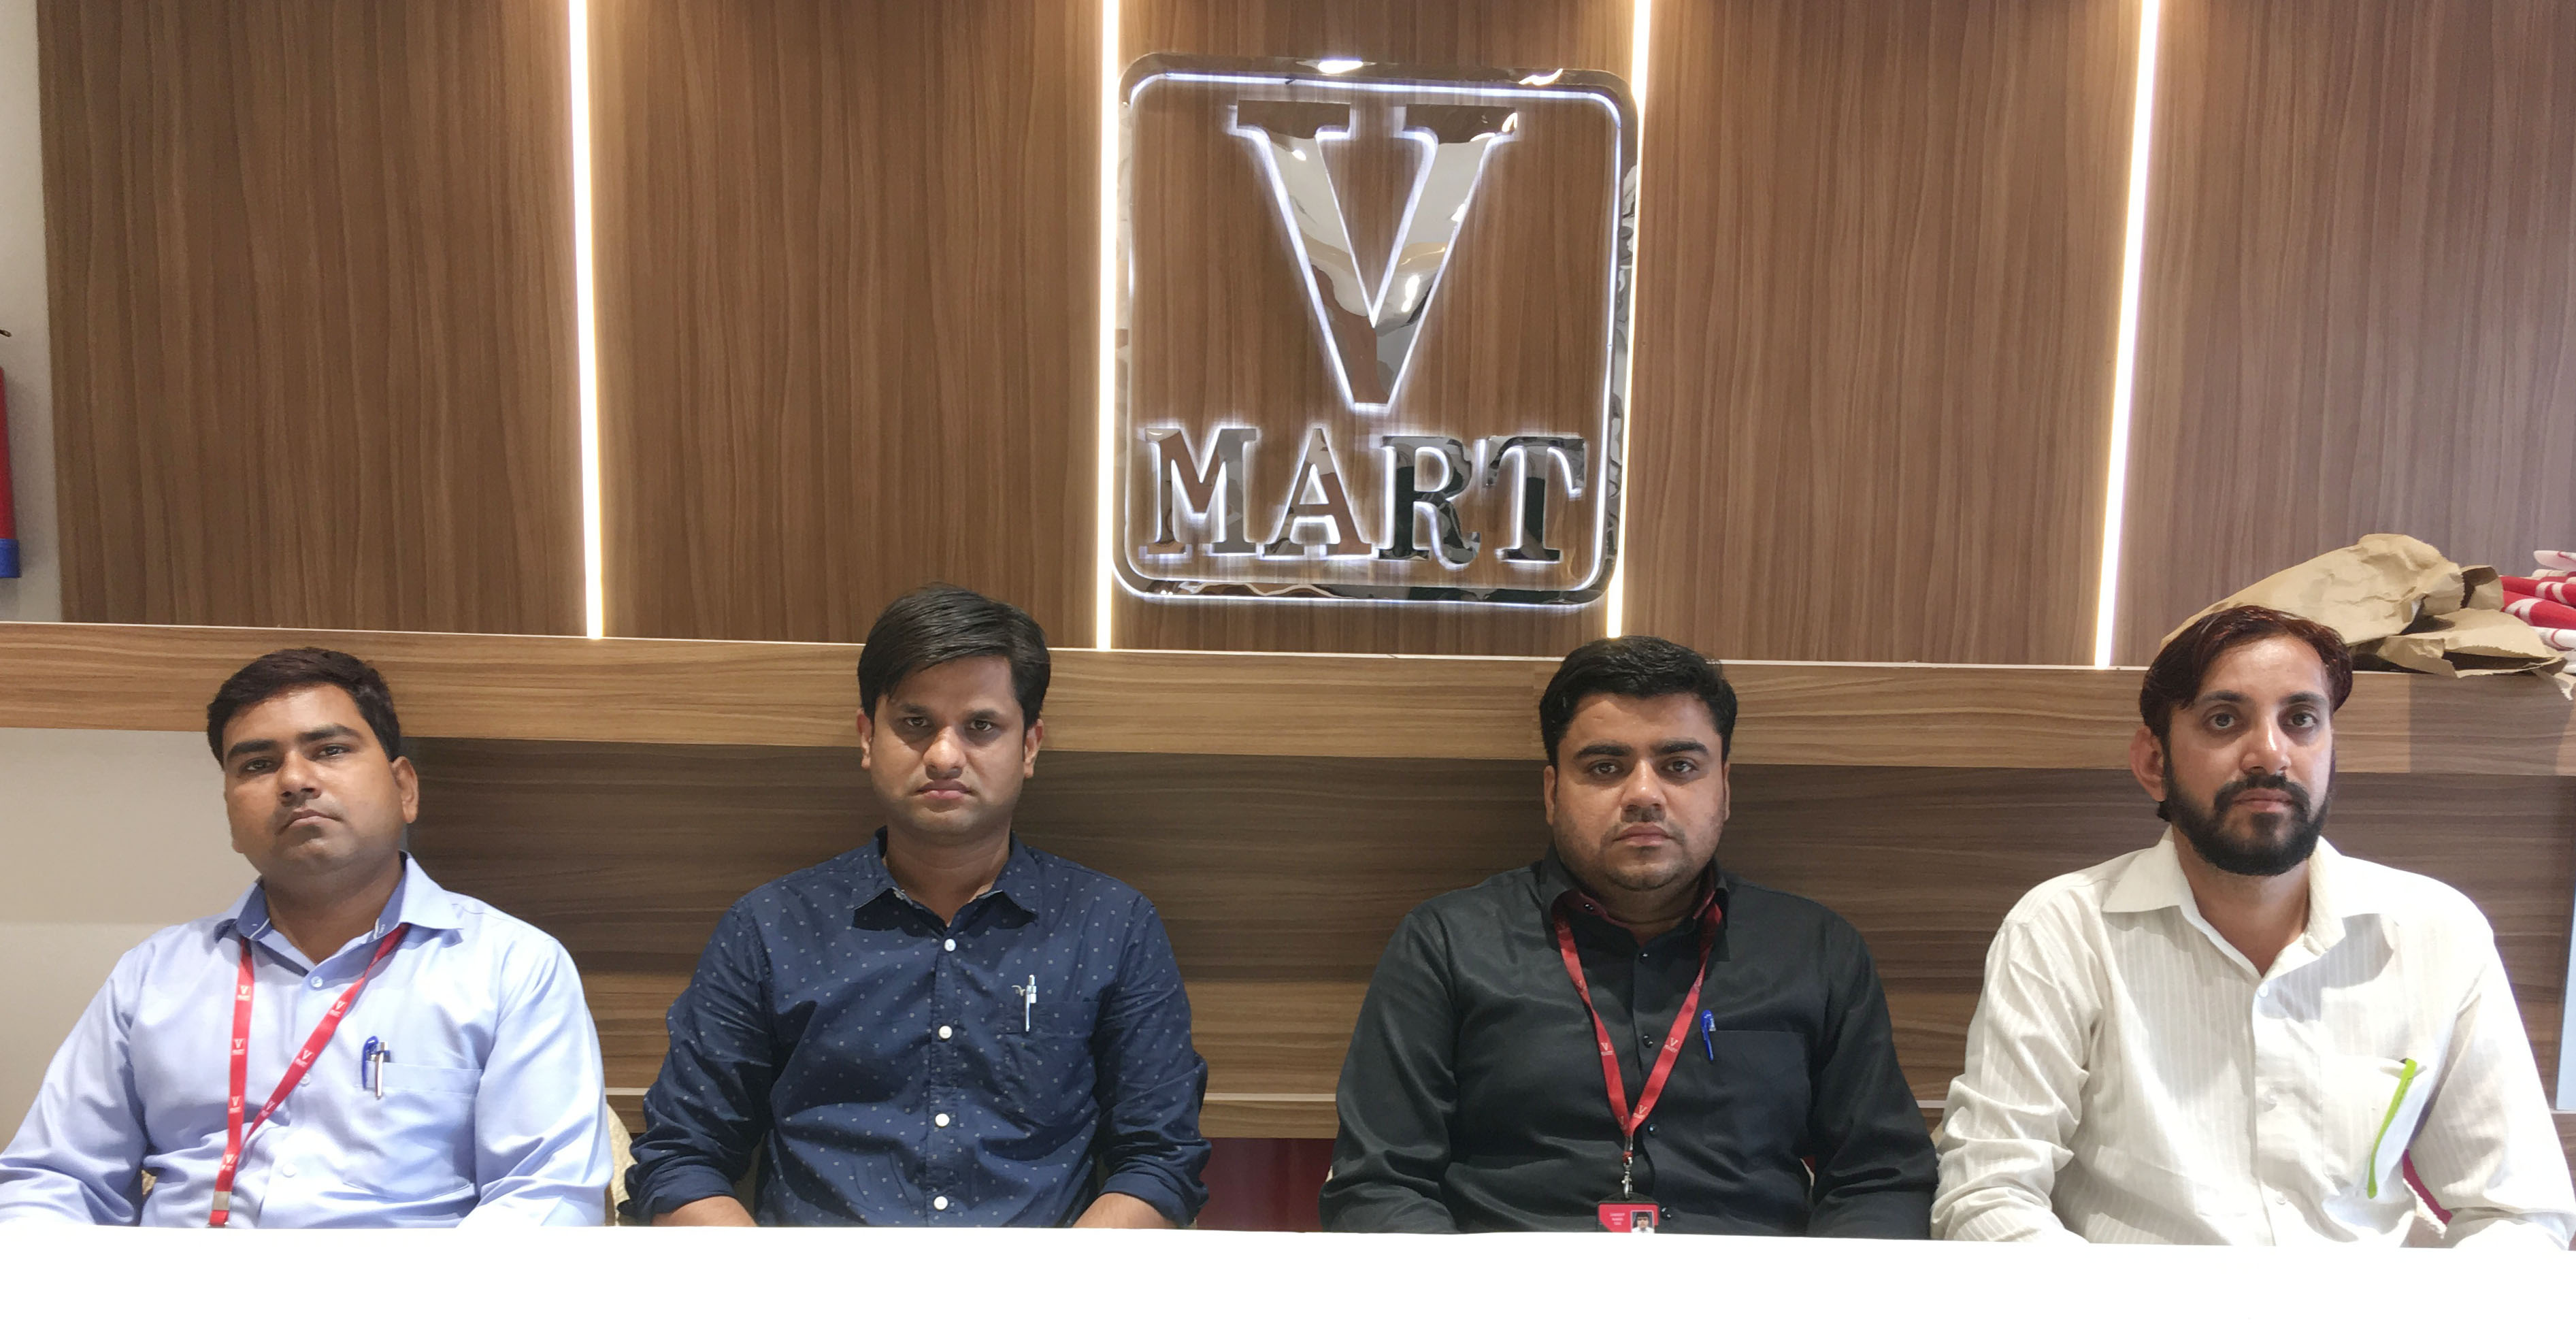 VMart set to acquire Tiger Global-backed LimeRoad in a distress sale